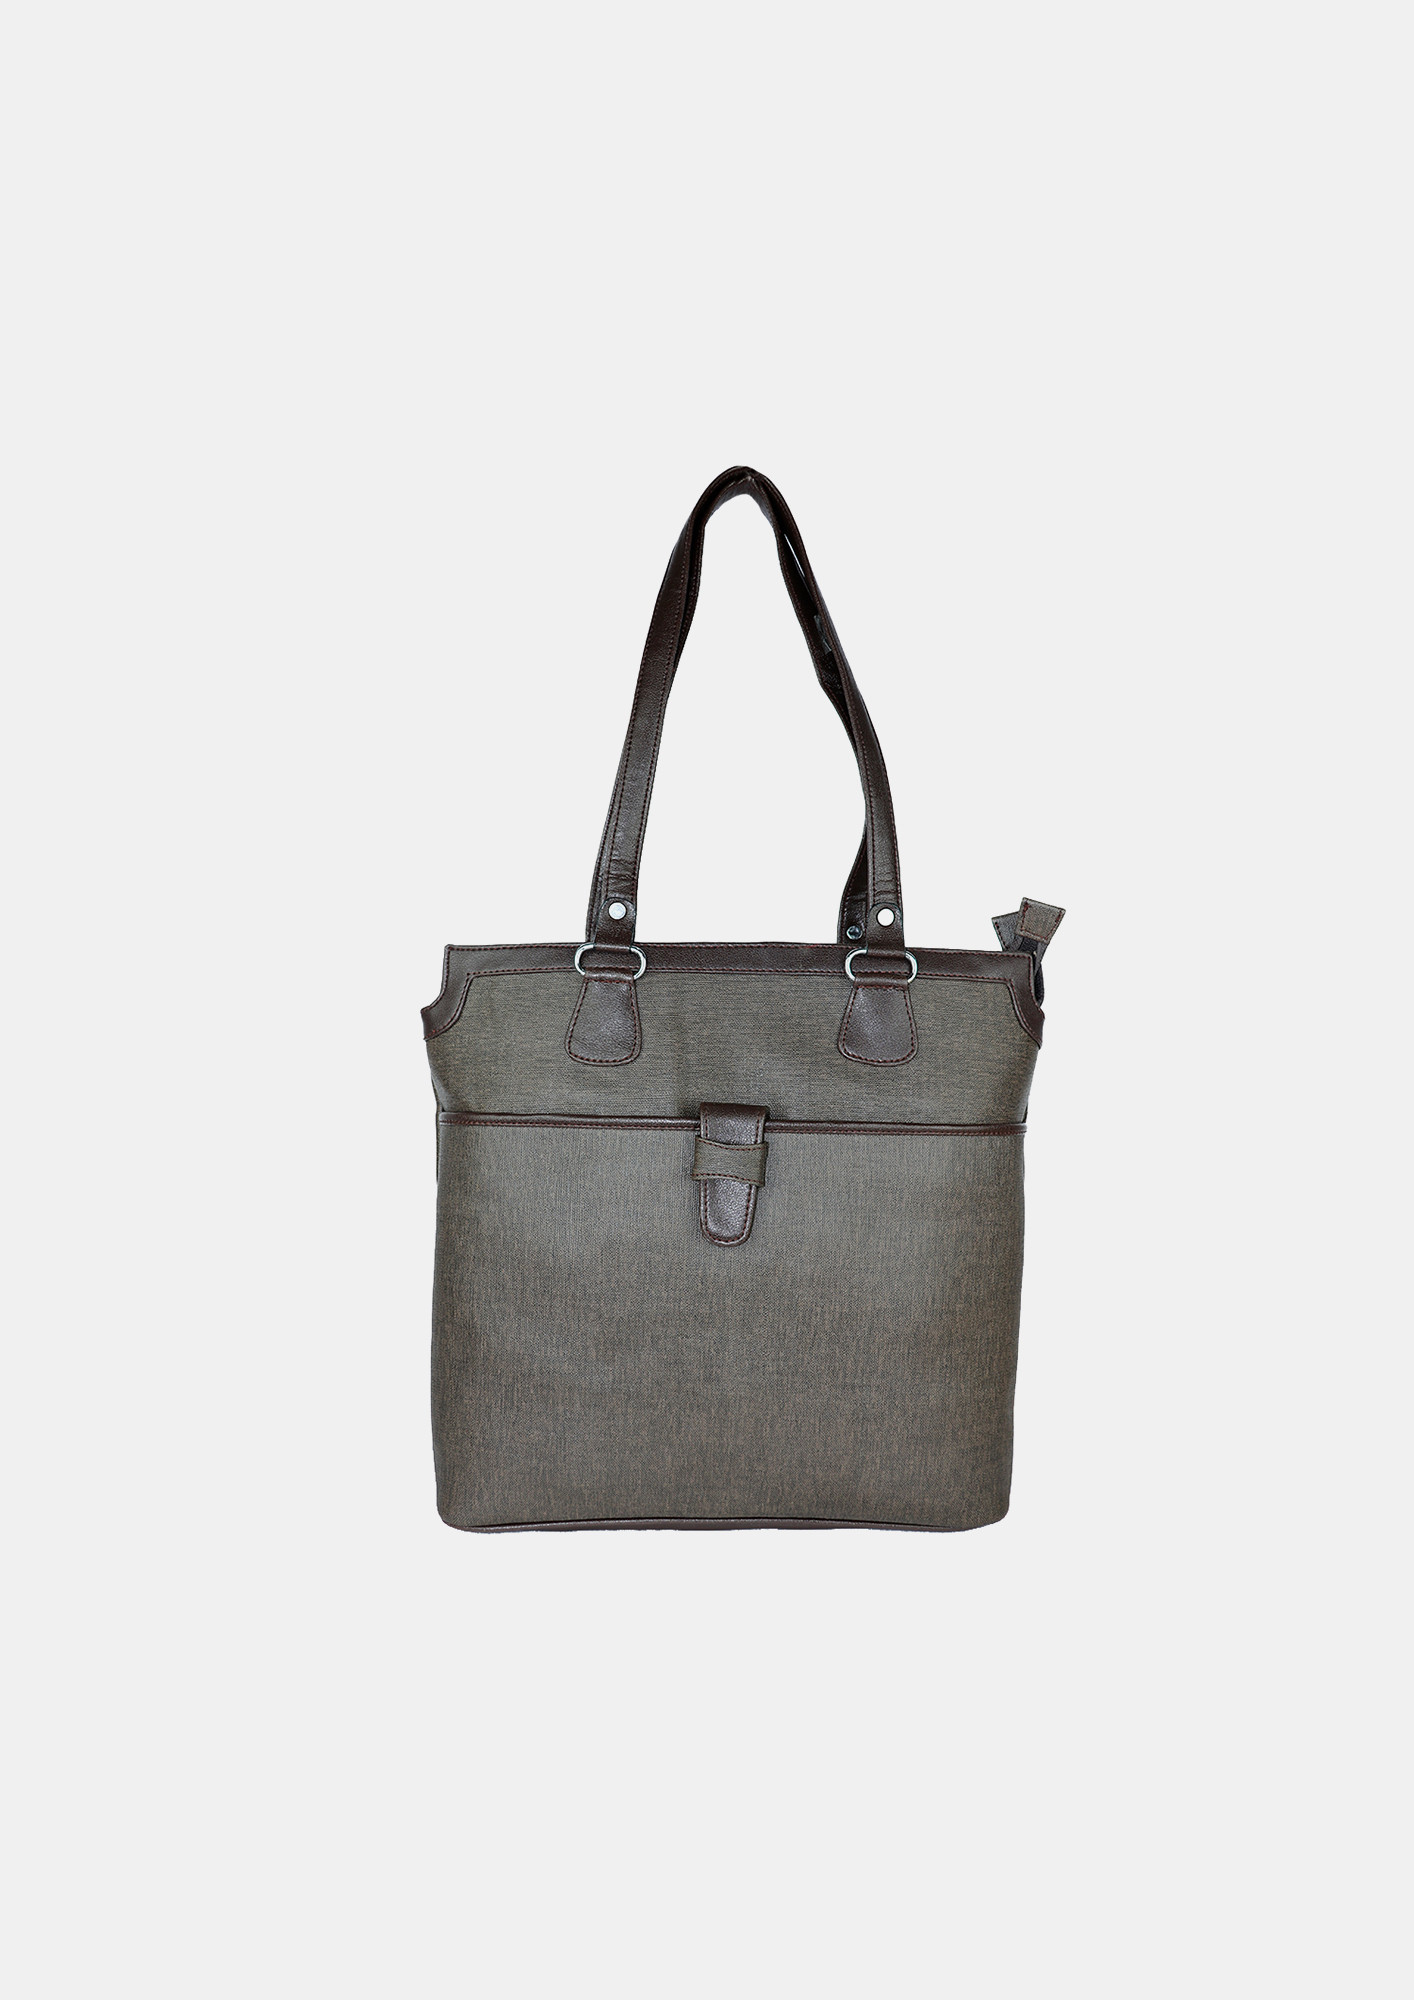 Latest Spring Collection Tote Bag For Women For Daily Use In Dark Brown